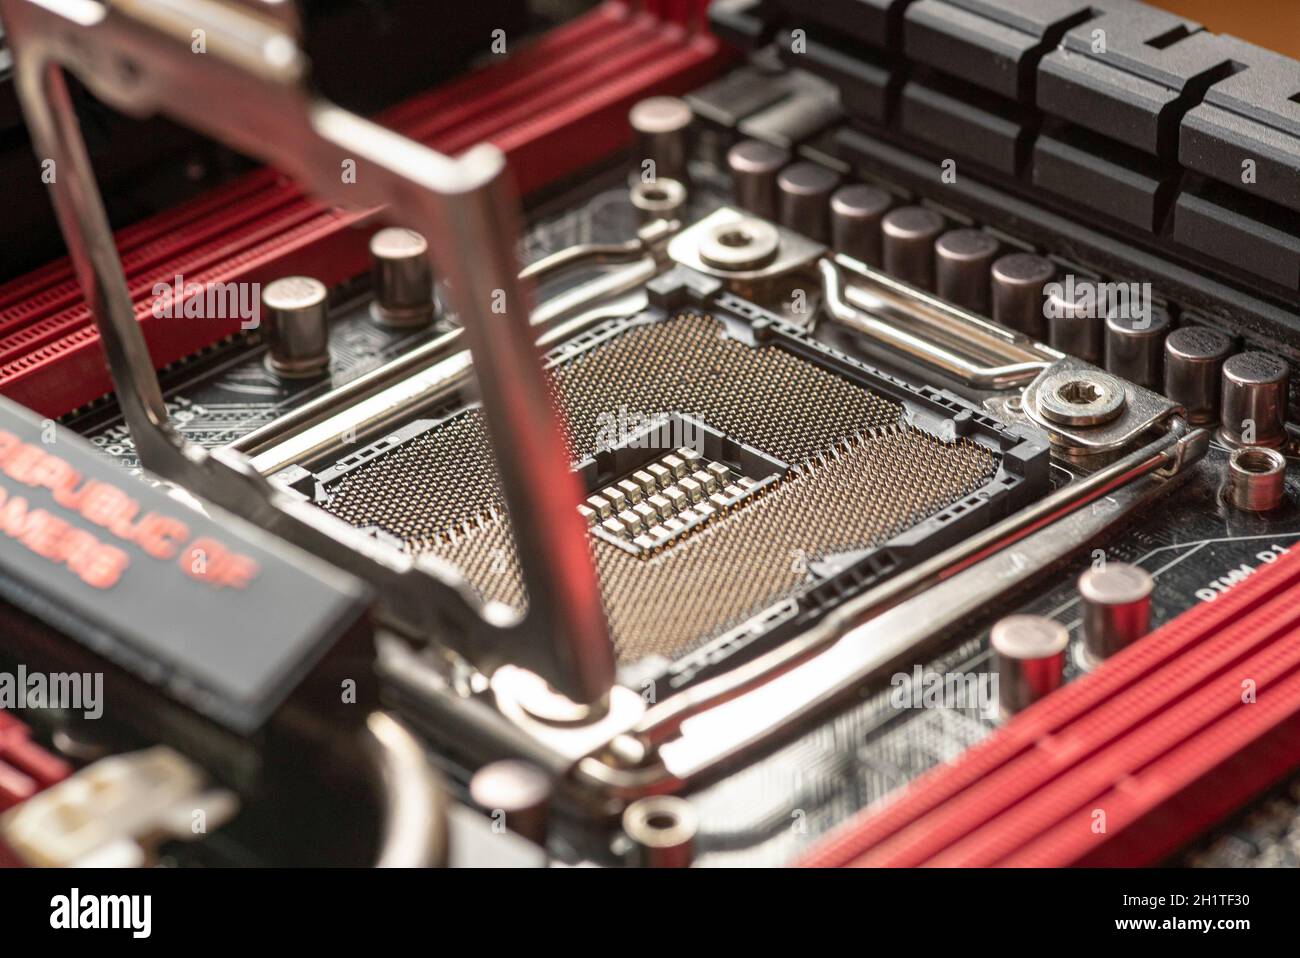 LOS ANGELES, USA 25 APRIL 2021: Detail of a Cpu socket in a motherboard of a gaming pc Stock Photo